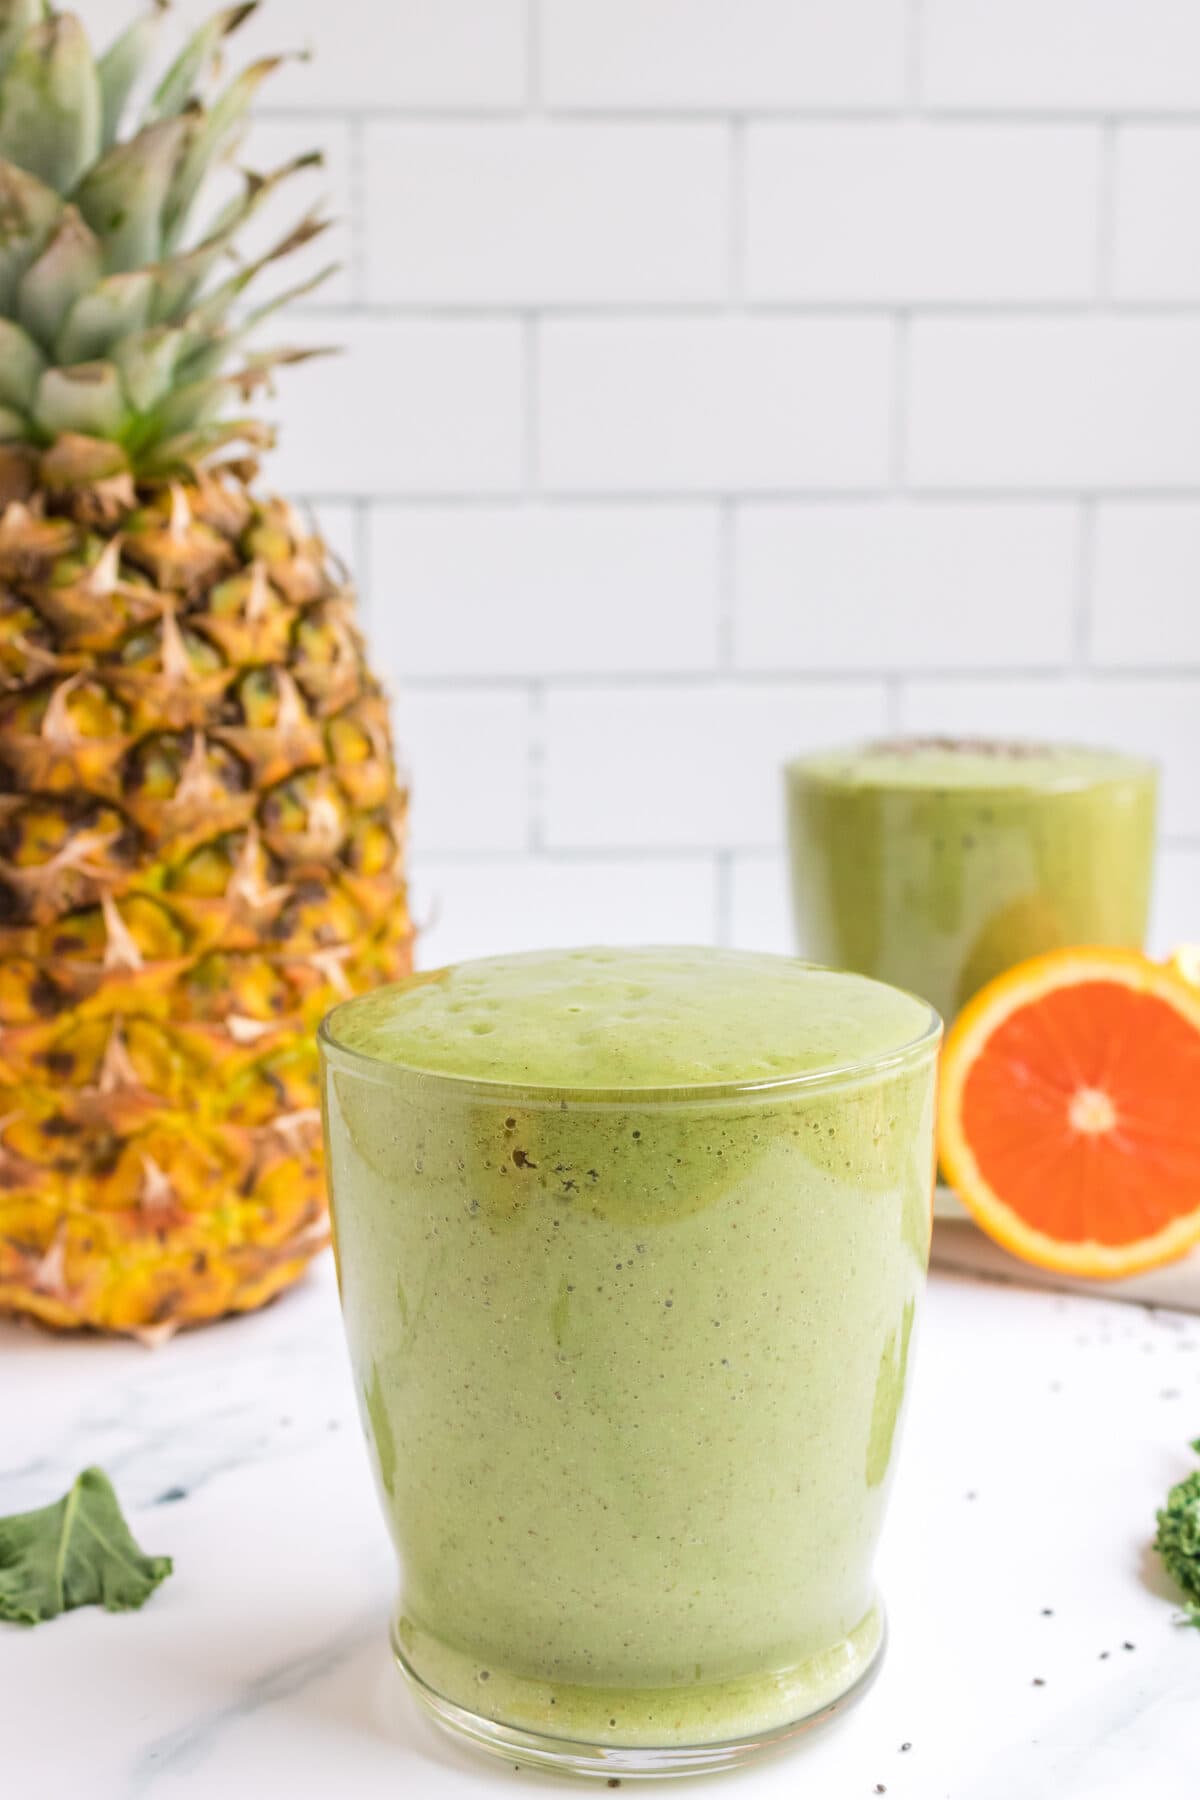 tropical green smoothie in a glass with pineapple in the background.